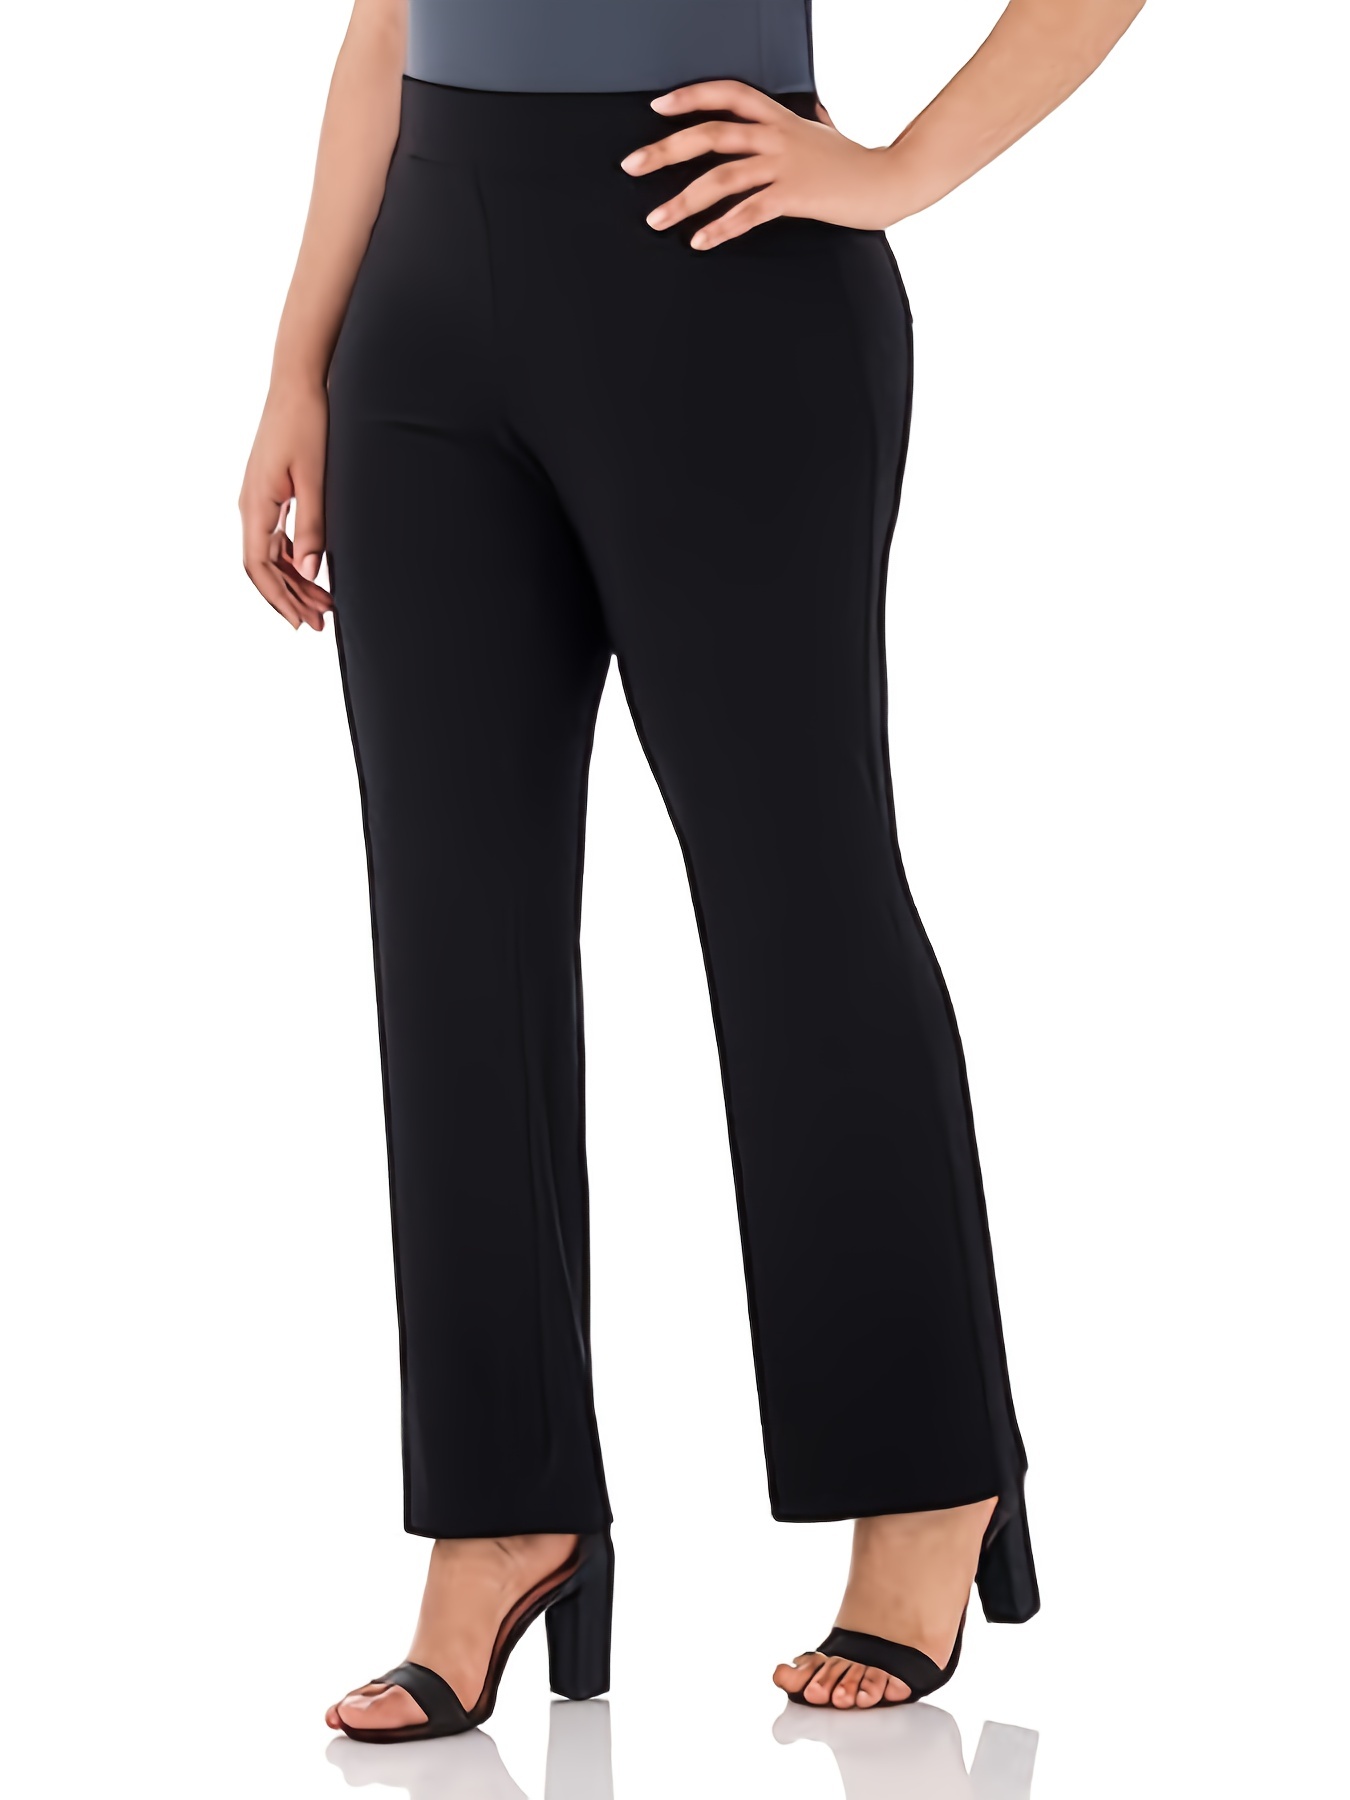 Shop Plus Size Pants  Plus Size Work Pants in Black Stretch with